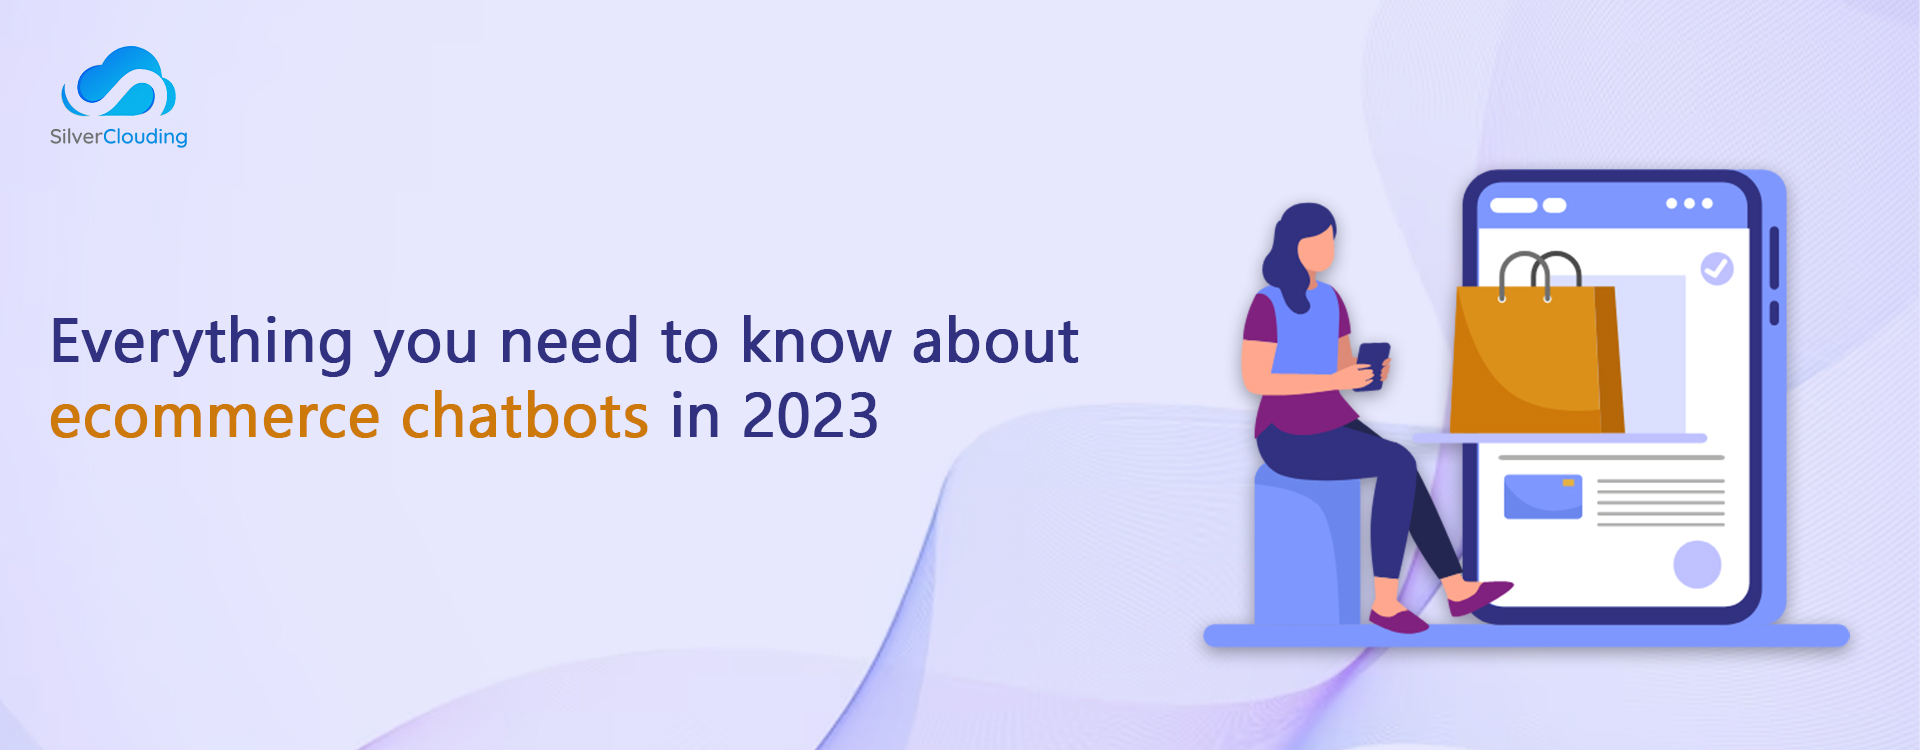 Everything You Need to Know About Ecommerce Chatbots in 2023